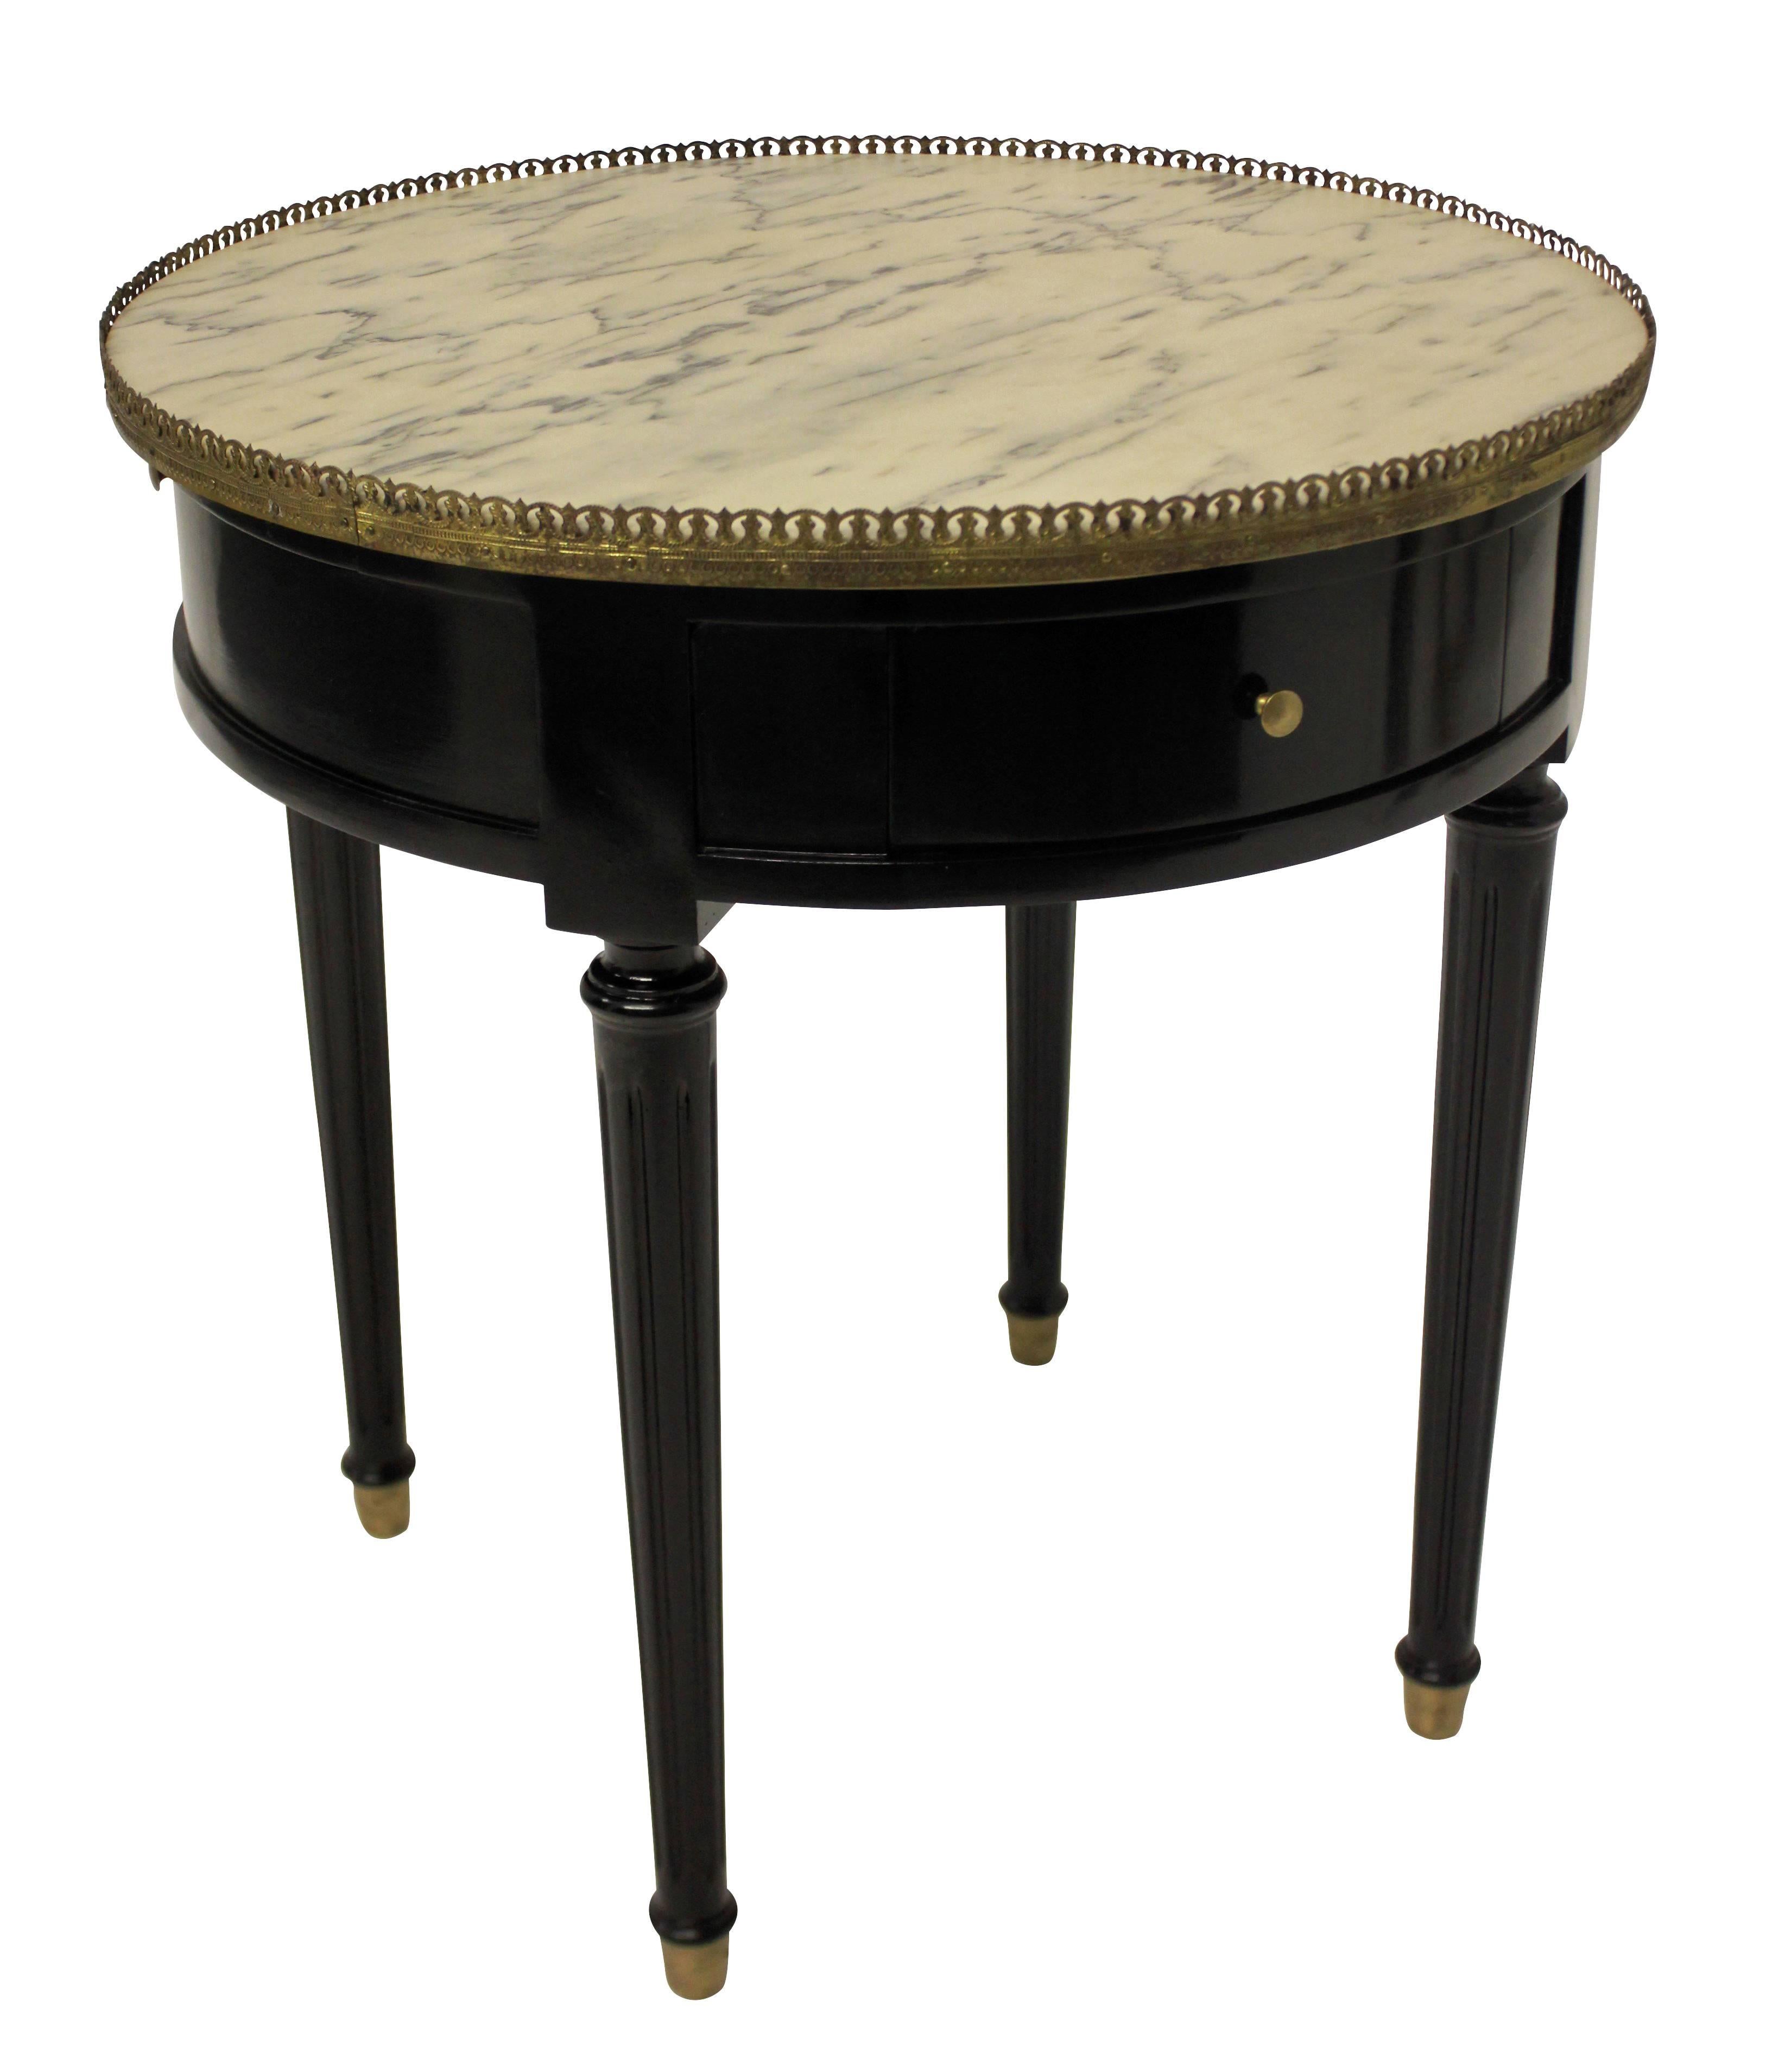 A French ebonized mahogany bouillotte table, with brass pierced gallery, marble top and brass sabot. Containing a single drawer and a blue leather covered slide.